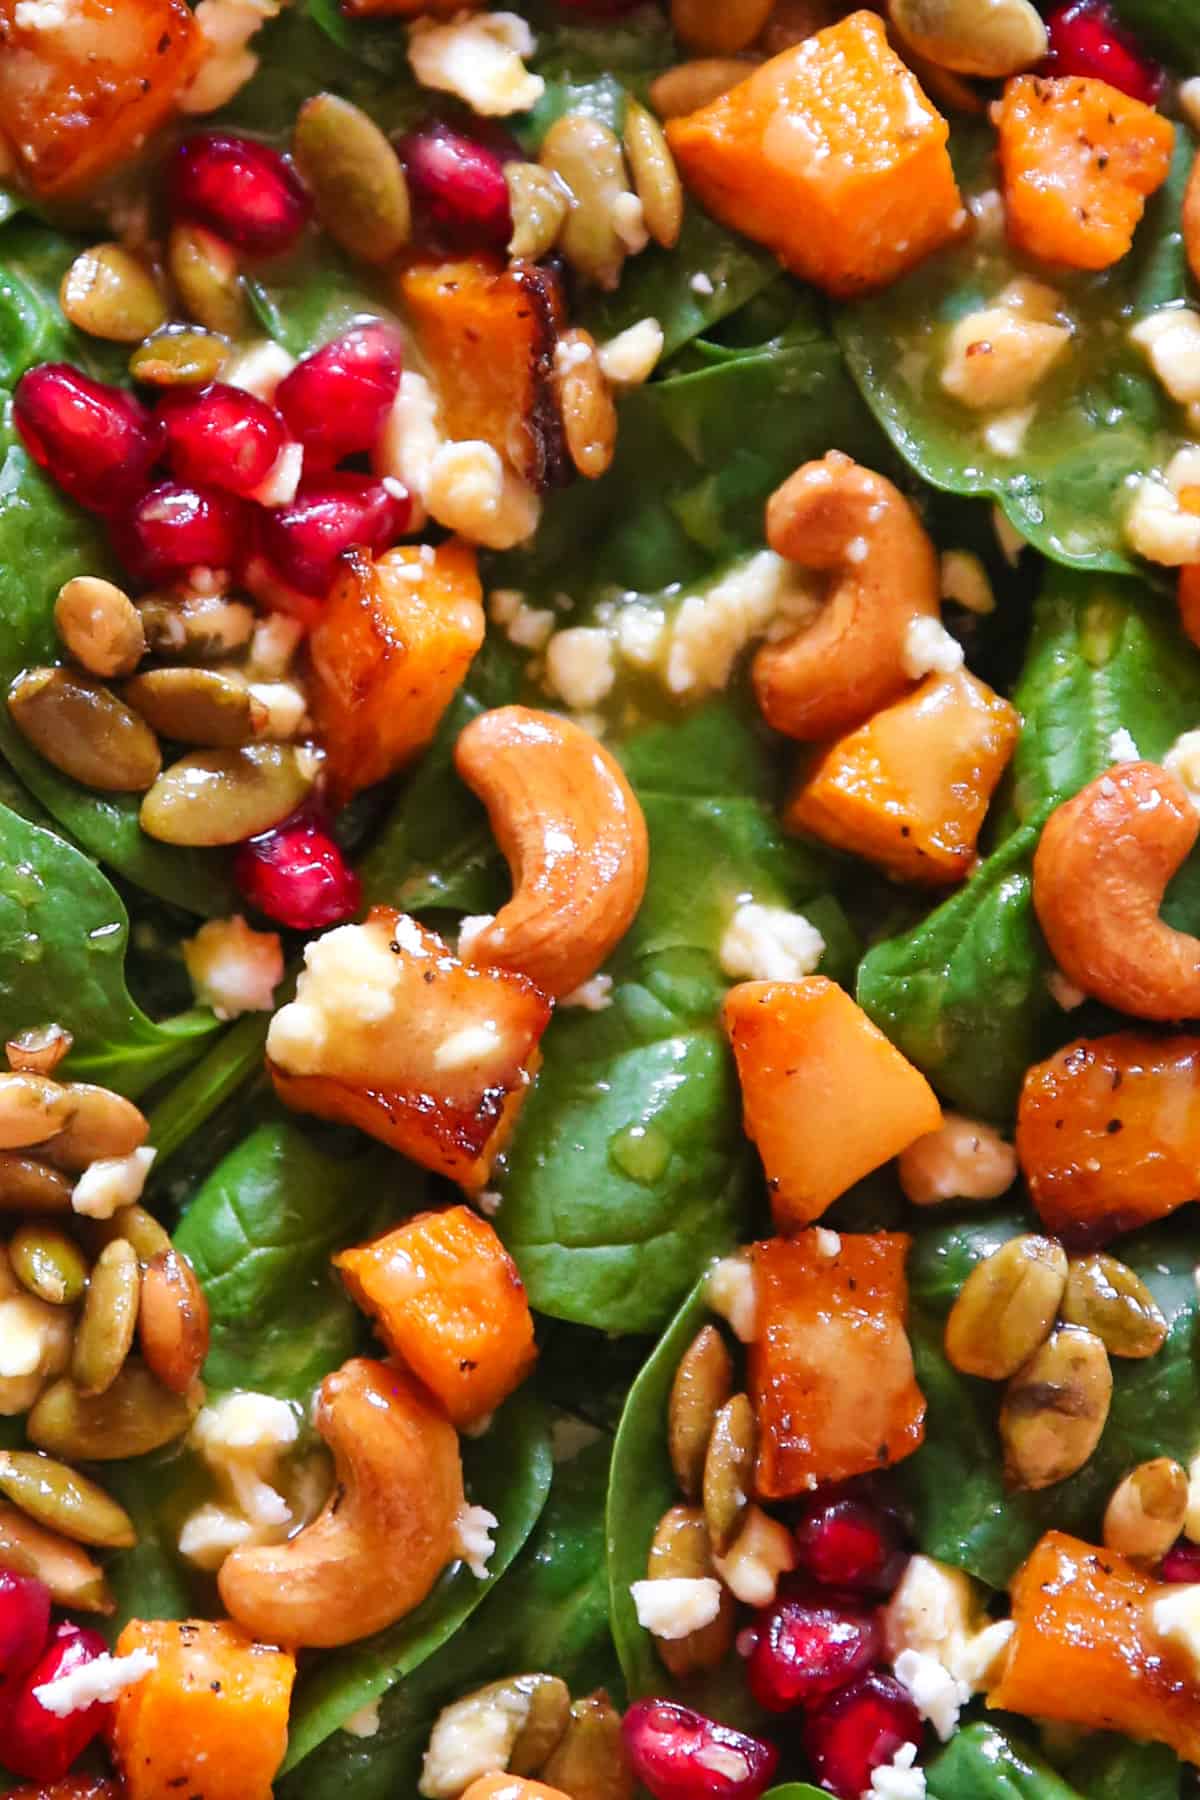 Butternut squash salad with spinach, cashews, pumpkin seeds, feta cheese, pomegranate seeds, and mustard honey-lime dressing - close-up photo.